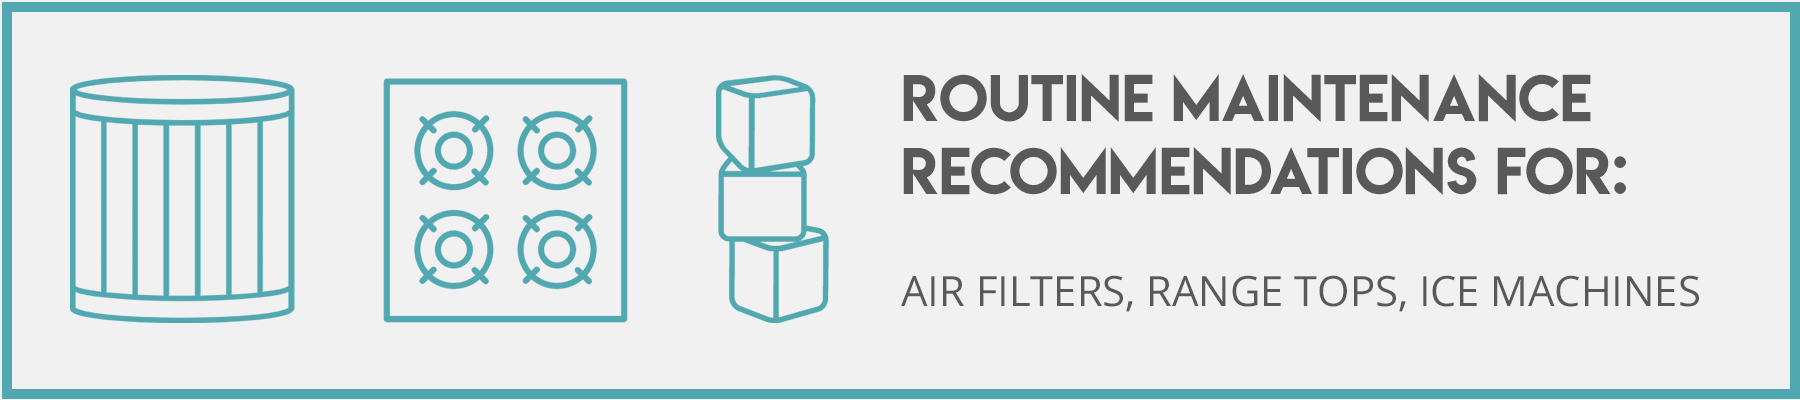 Routine Maintenance Recommendations